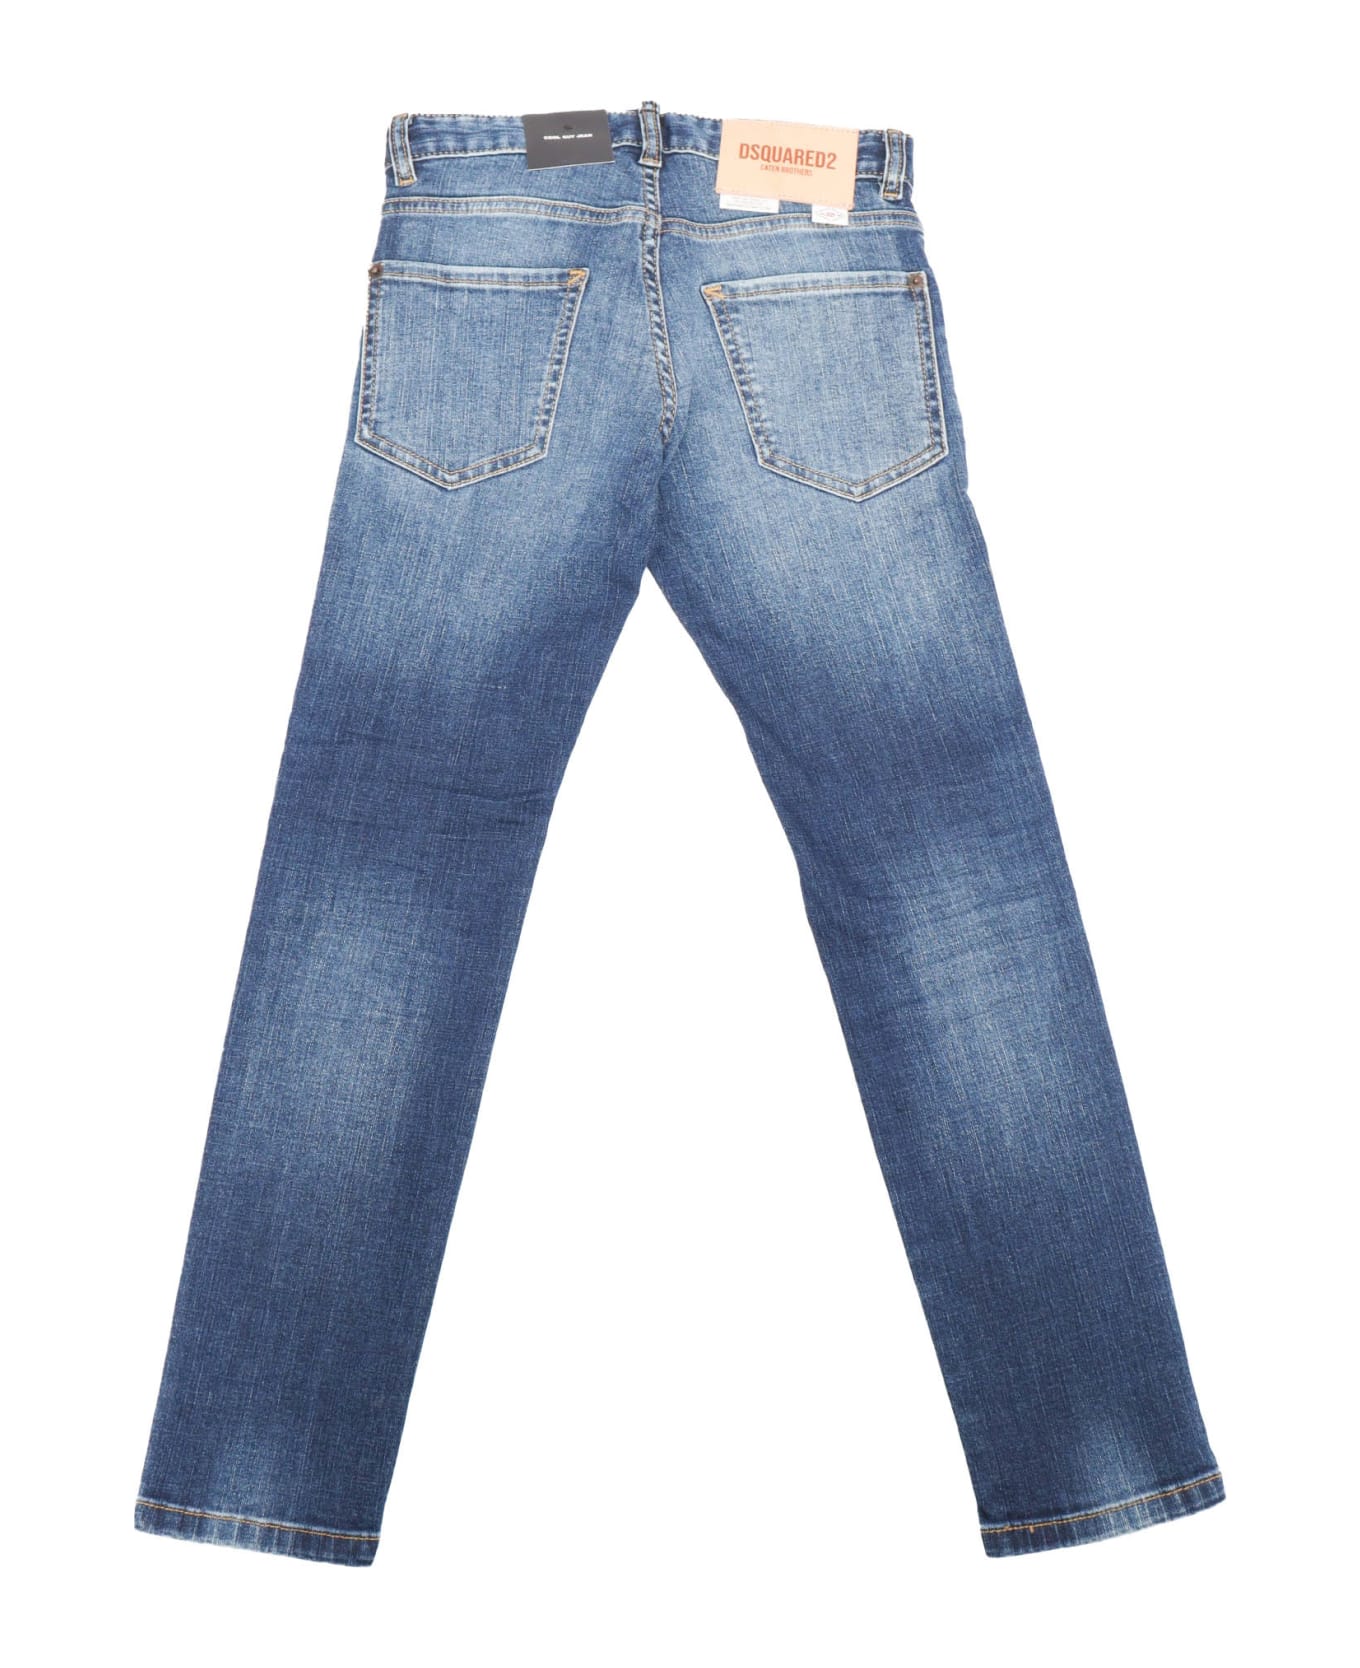 Dsquared2 Cool Guy Jeans - BLUE ボトムス